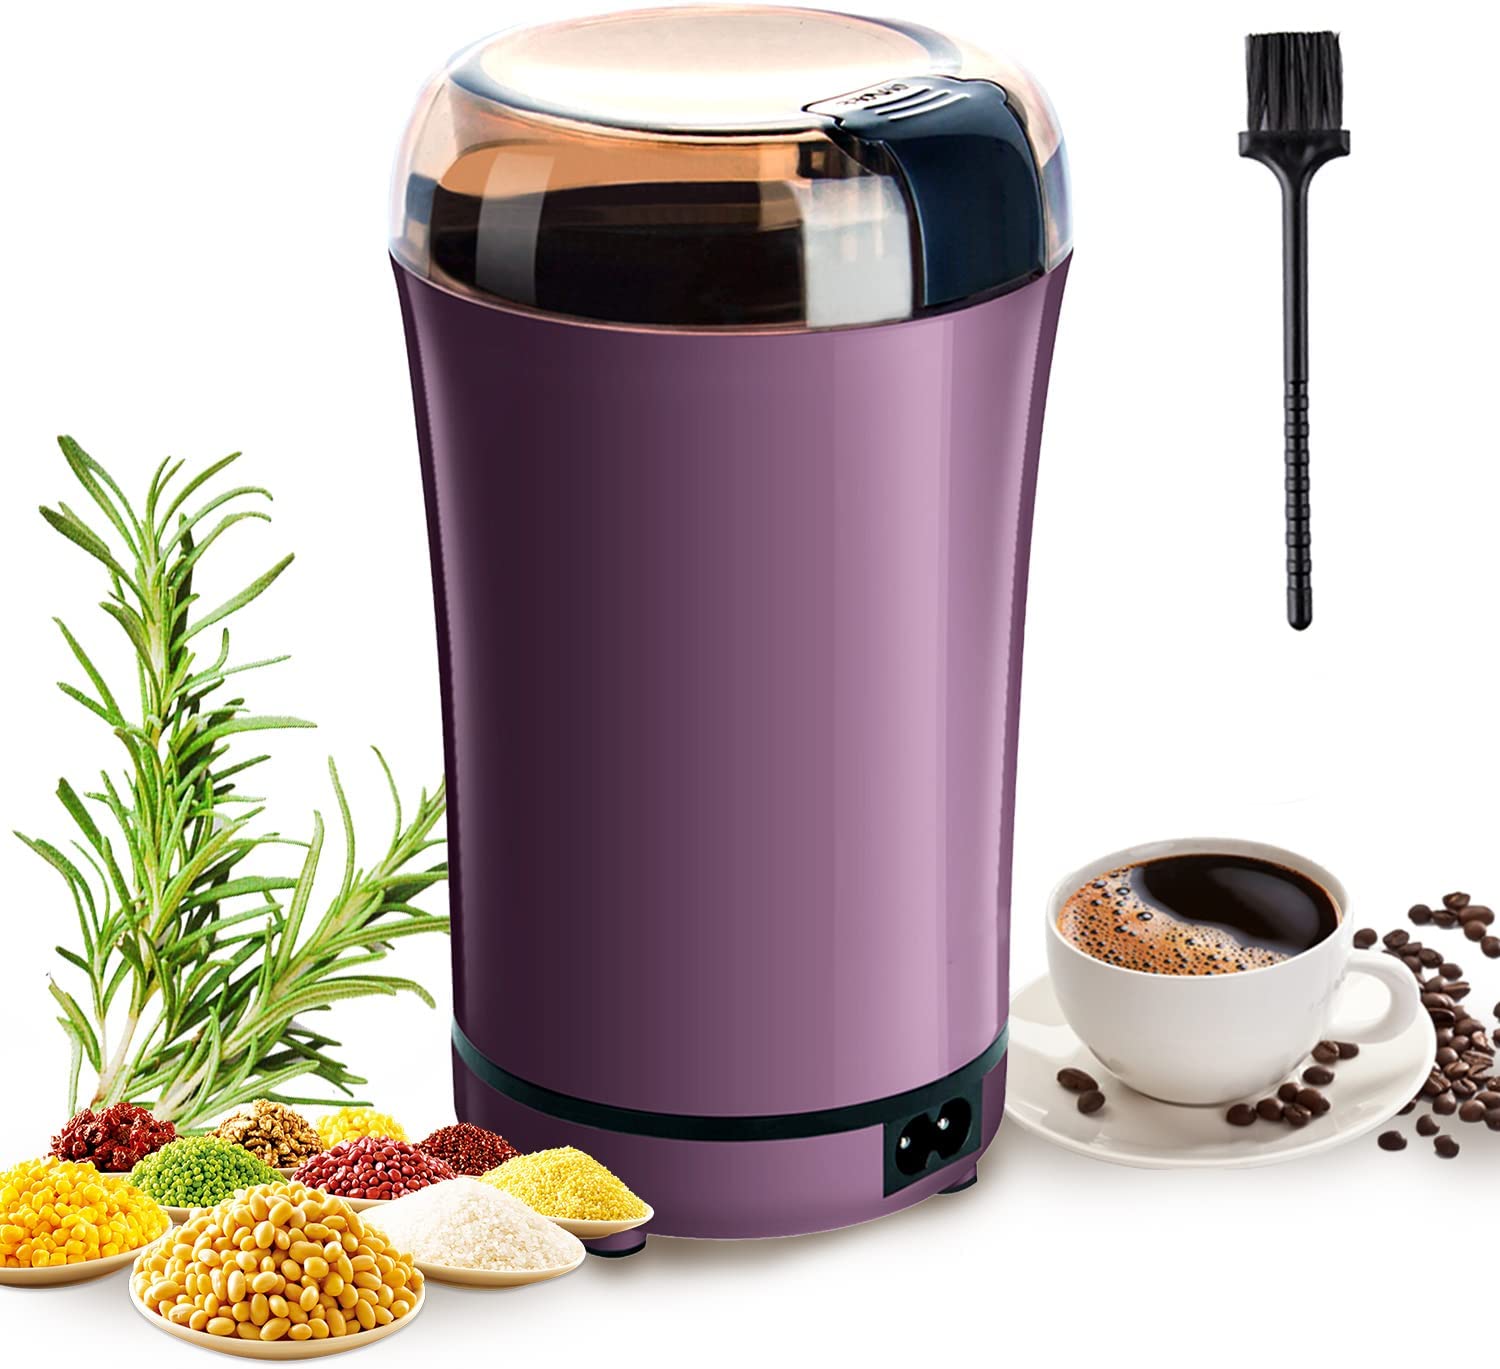 SKYTONE Grinder Multi-Functional Electric Stainless Steel Herbs Spices Nuts Grain Grinder, Portable Coffee Bean Seasonings Spices Mill Powder Machine Grinder Machine for Home and Office